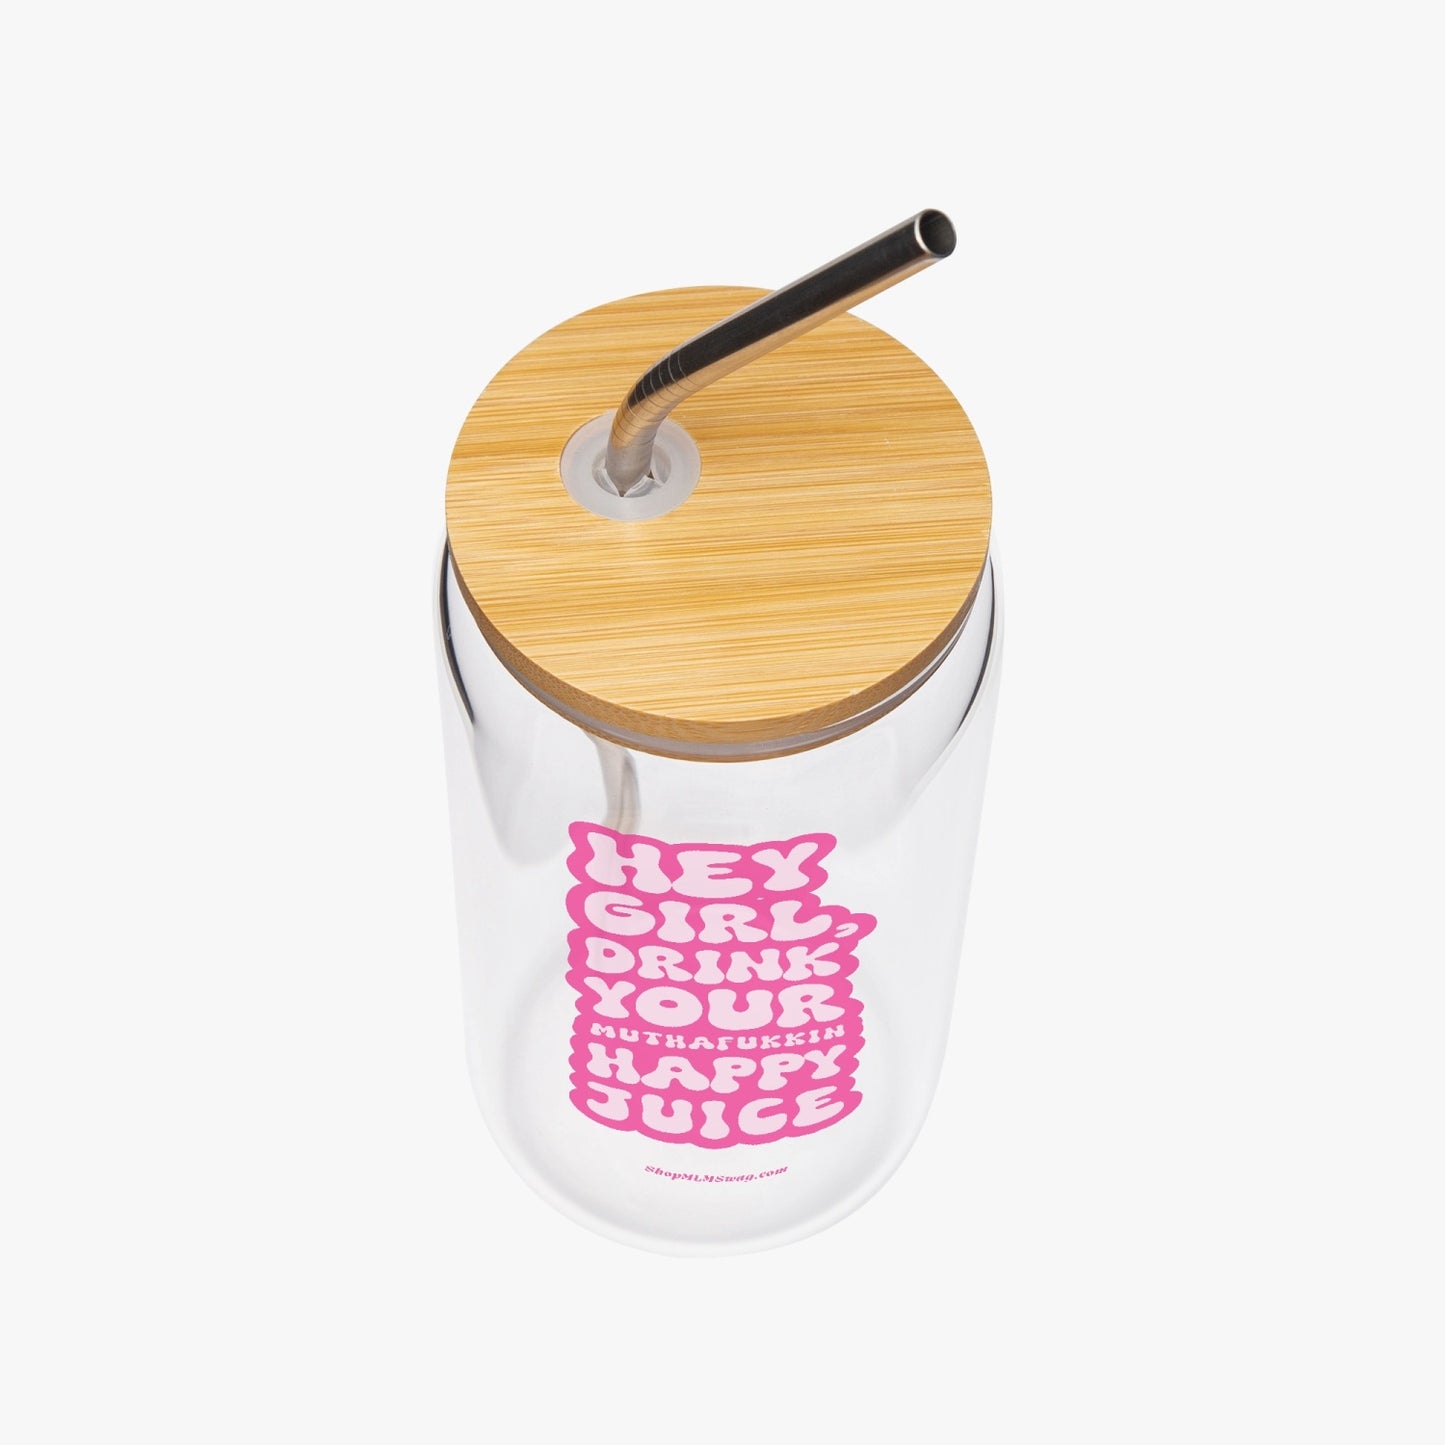 Hey Girl, Drink Your MFing Happy Juice — Drinking Glass w/ Bamboo Lid